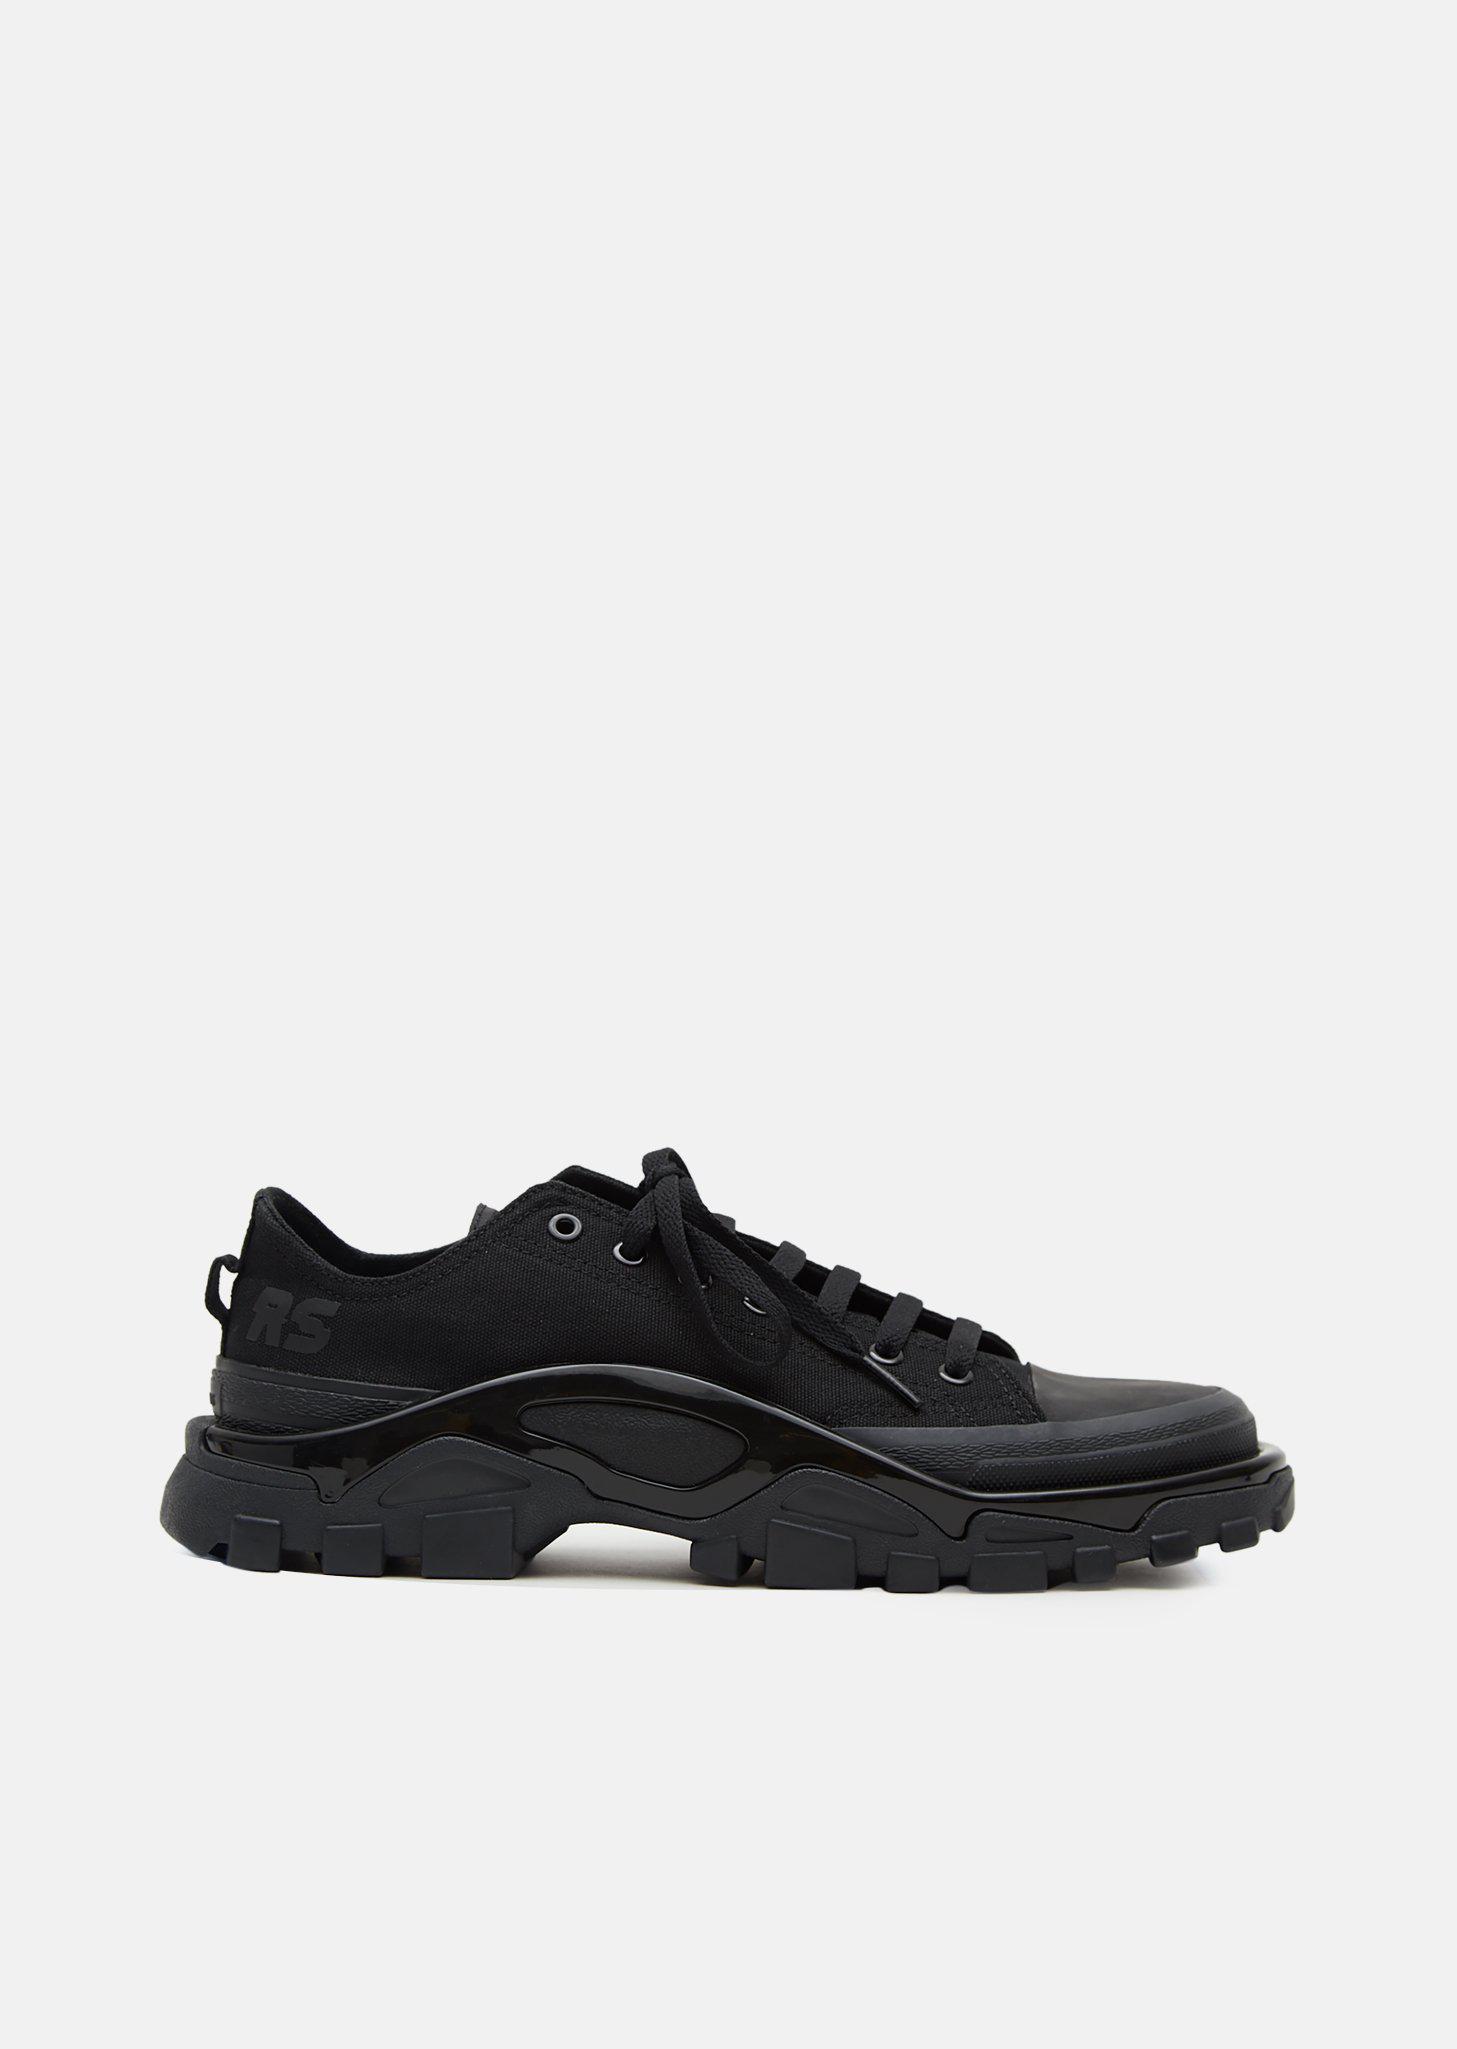 adidas By Raf Simons Canvas Rs Detroit Runner Sneakers in Black | Lyst